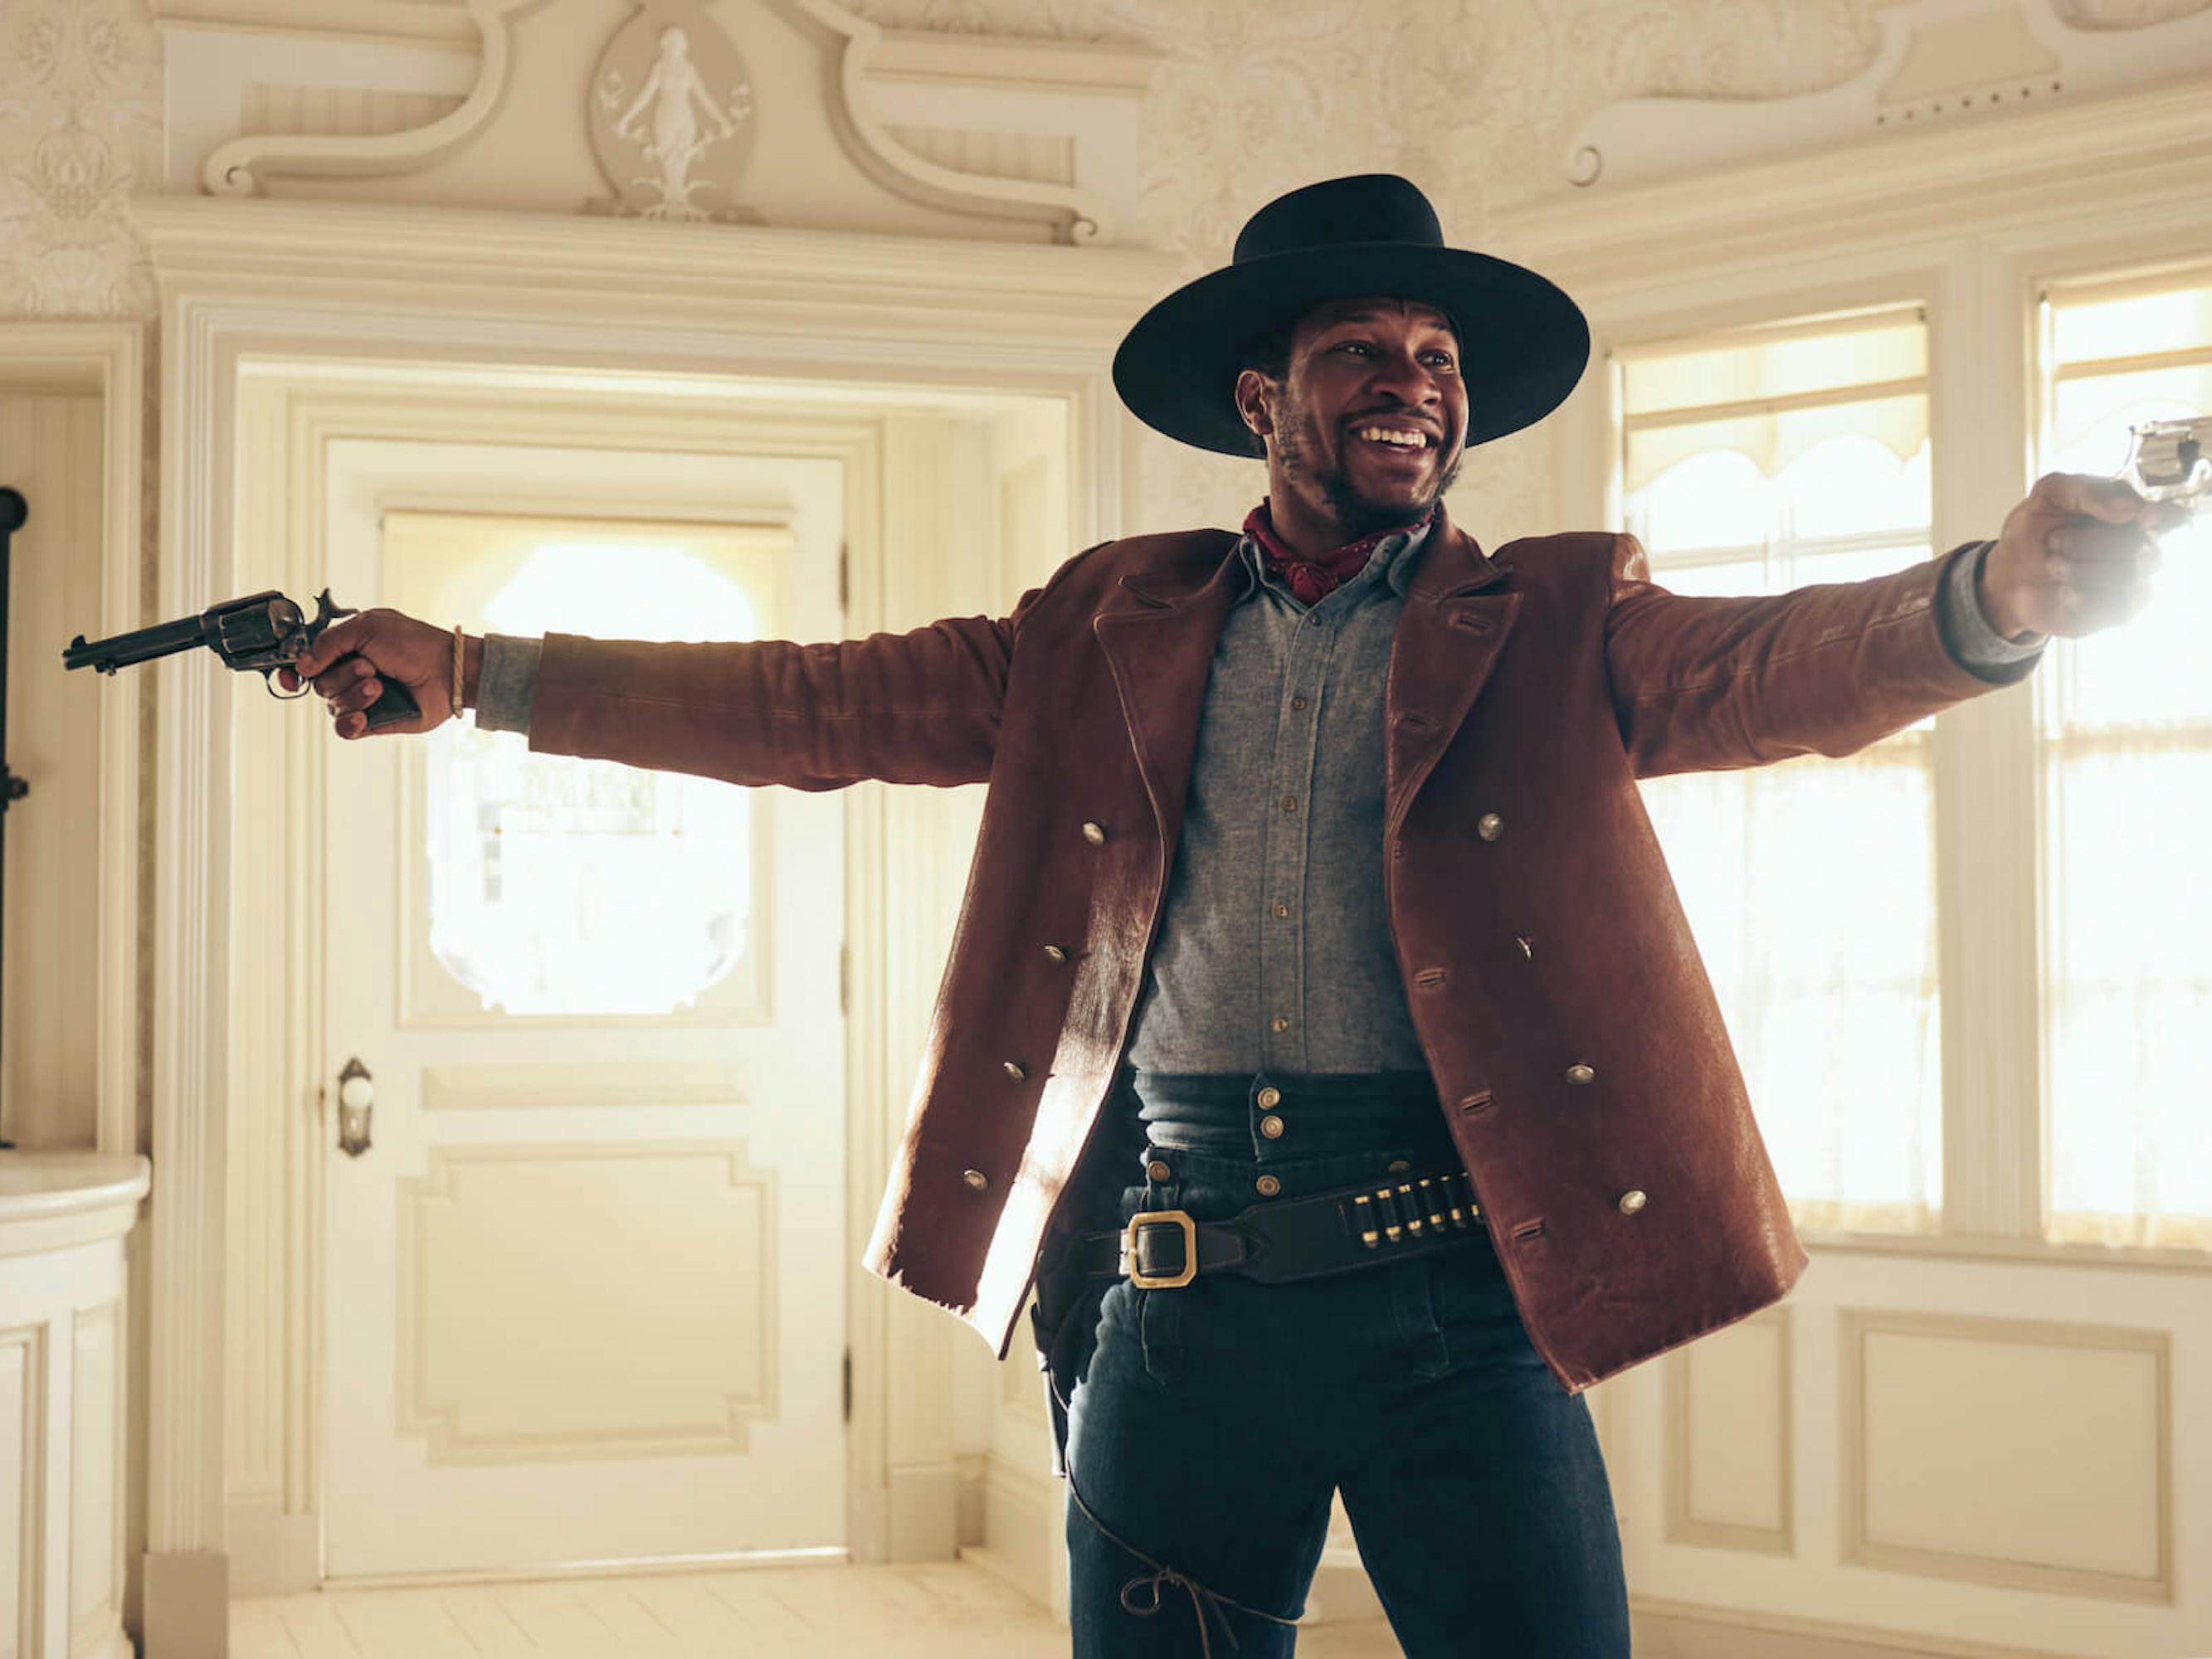 Nat Love (Jonathan Majors) holds two guns in opposing directions. He wears a dark hat, gray shirt, brown jacket with gold peacoat buttons, a red handkerchief, and navy pants. His smile is dissonant with this high intensity picture.